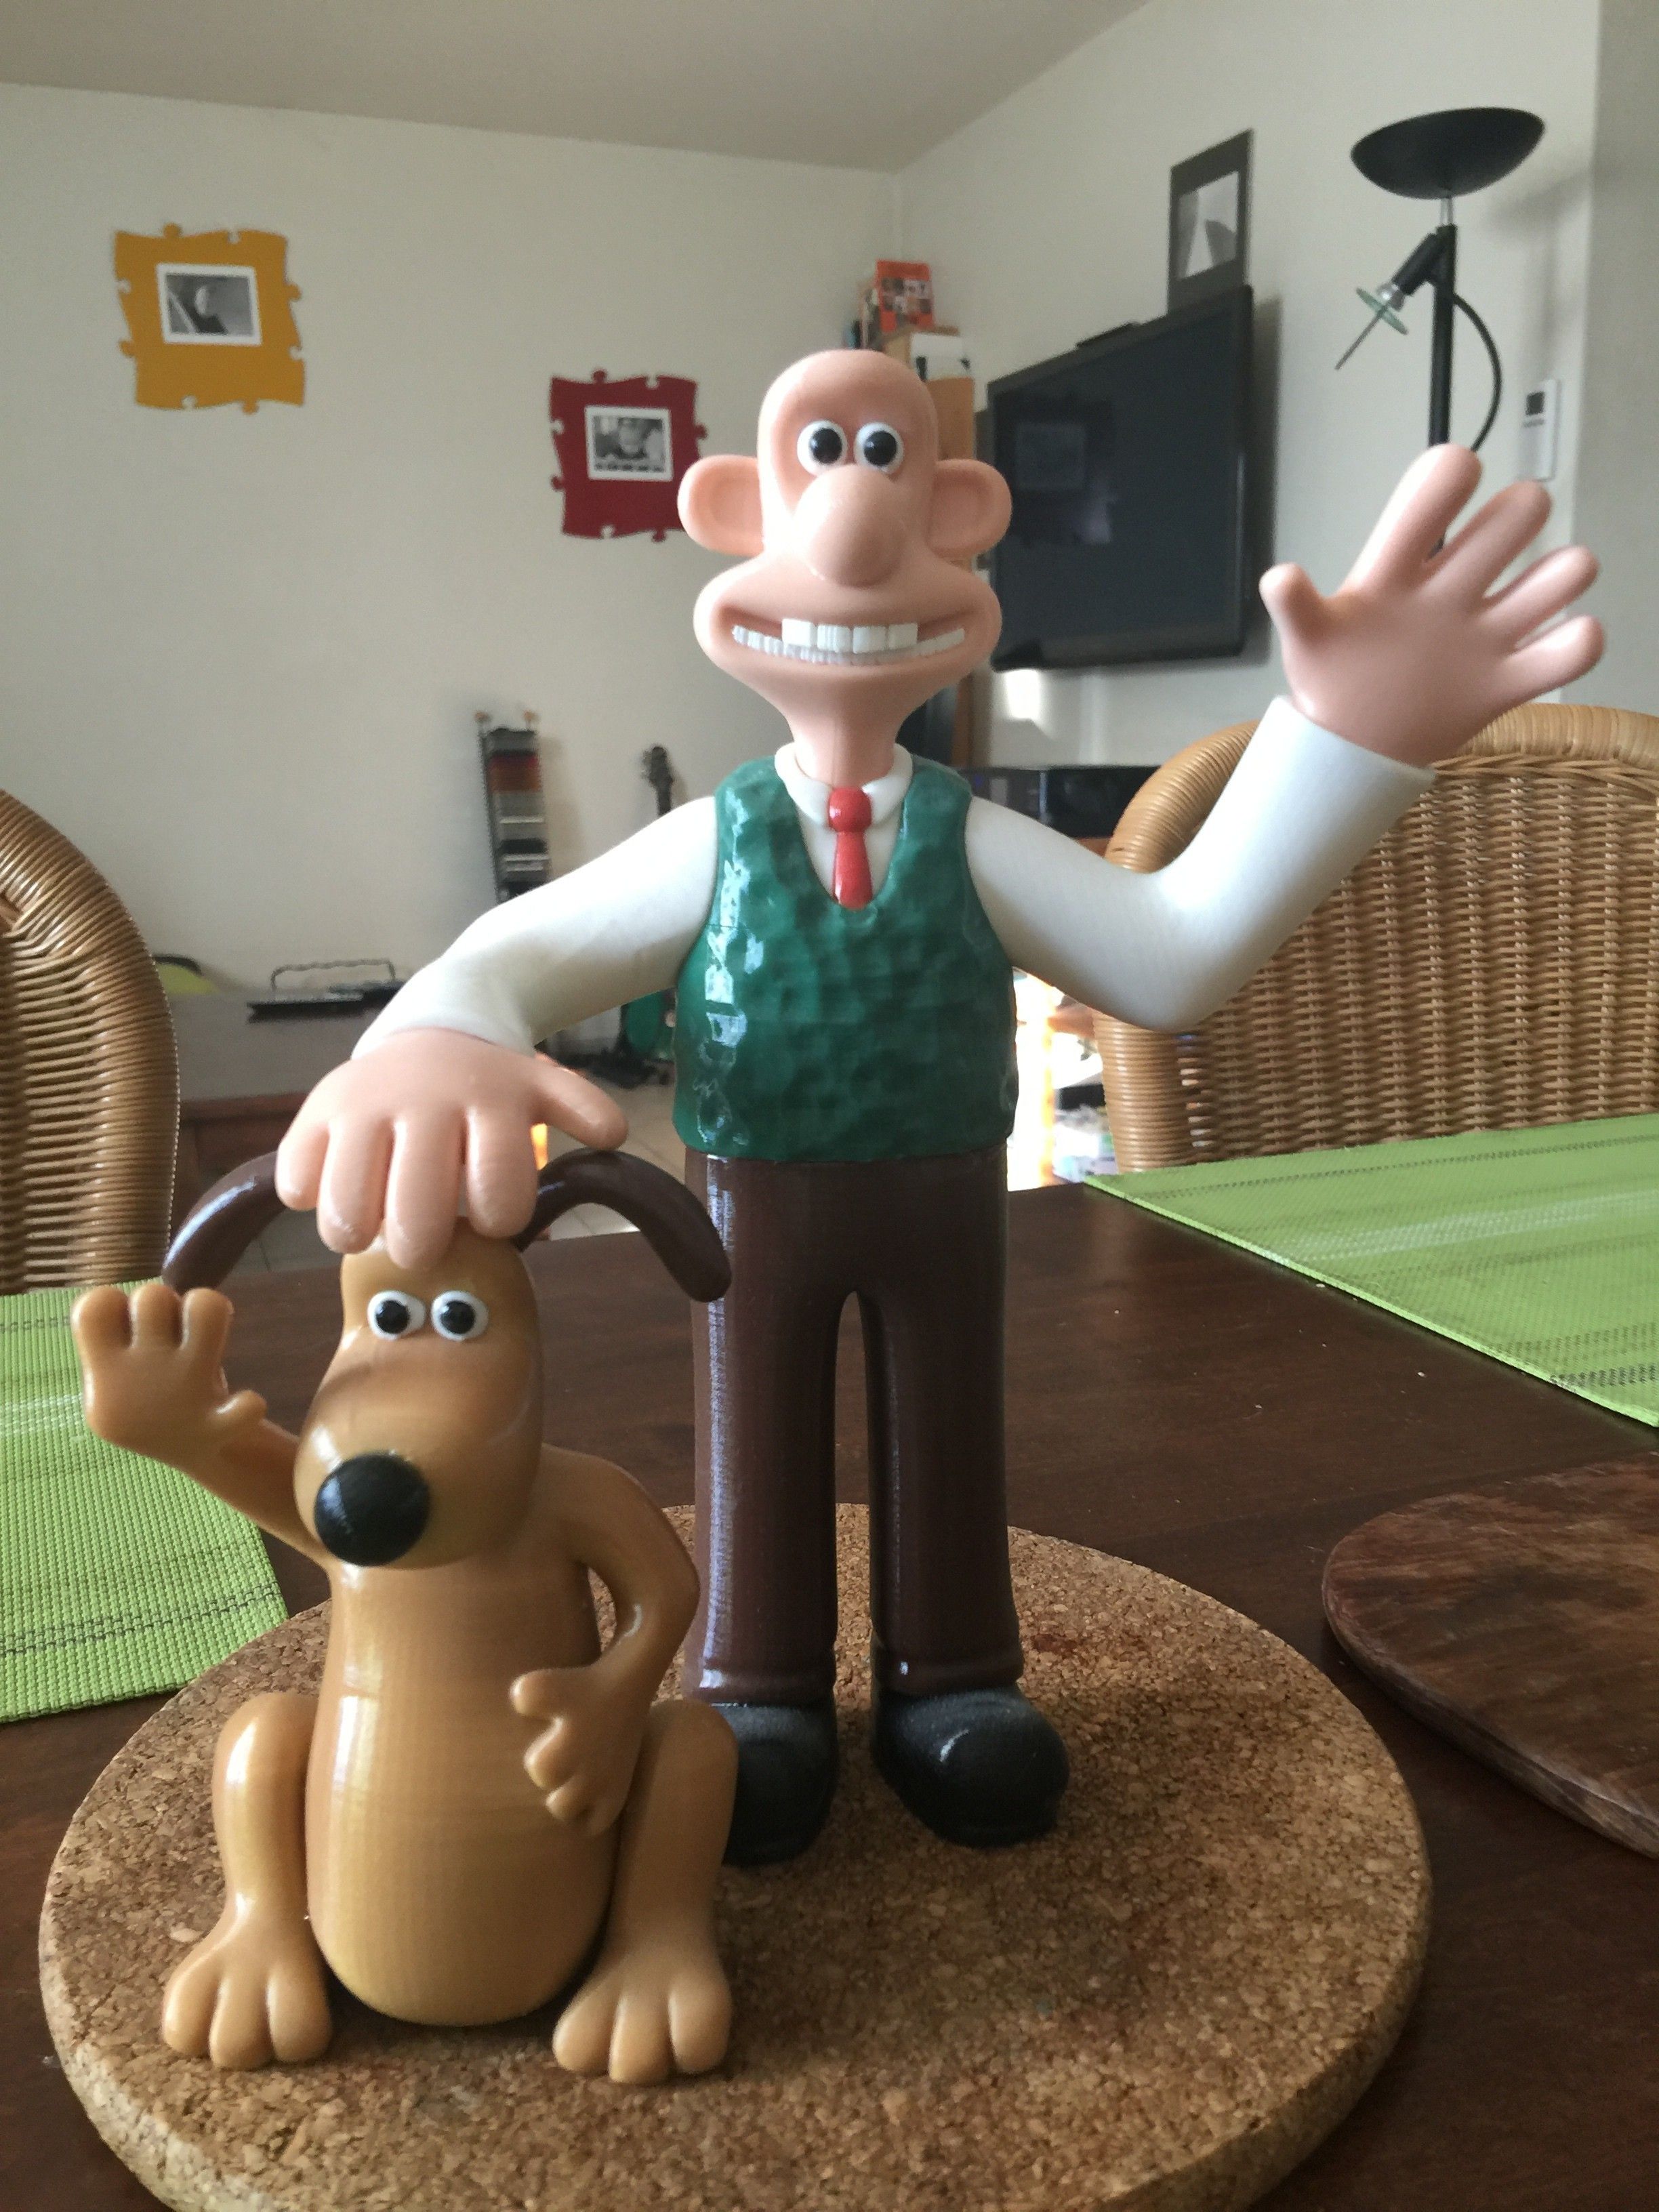 Wallace y Gromit, GabuZome